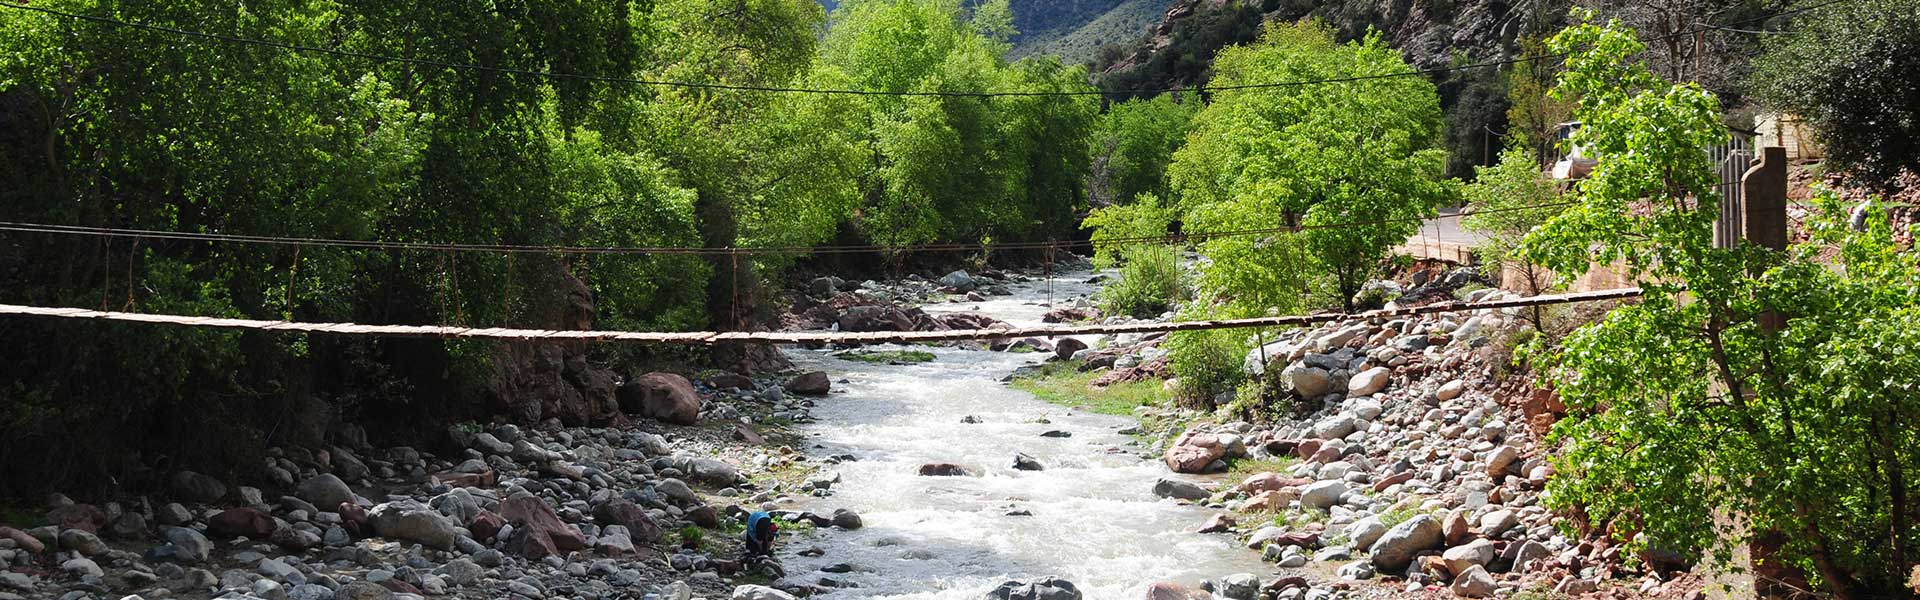 Day trip to Ourika Valley from Marrakech